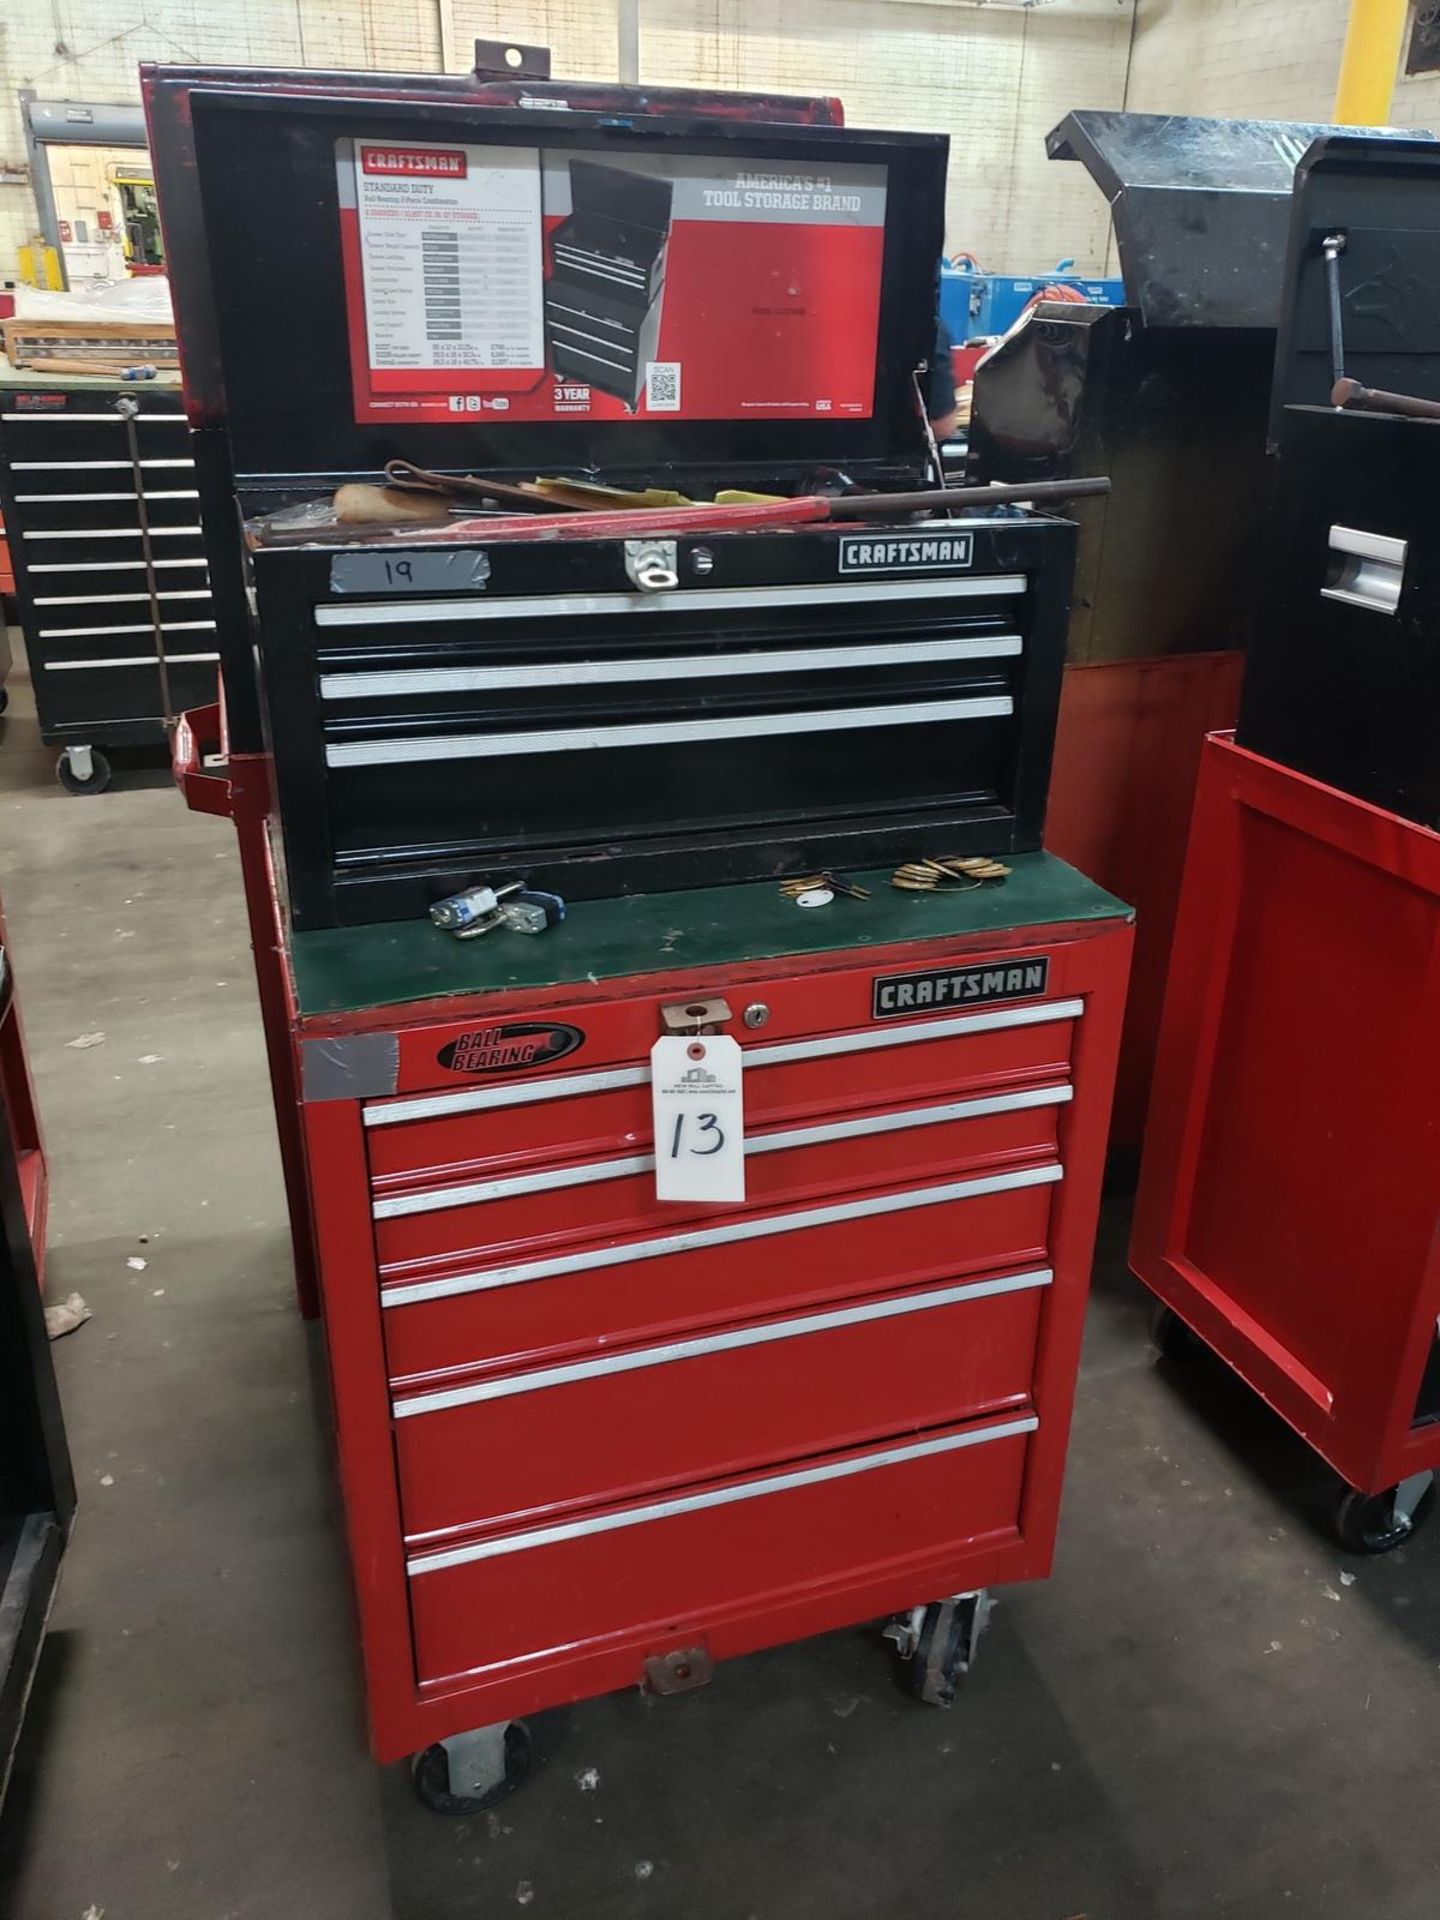 Craftsman Top & Bottom Tool Chests, W/ Contents, (See Additional Pictures) Rig Fee: $25